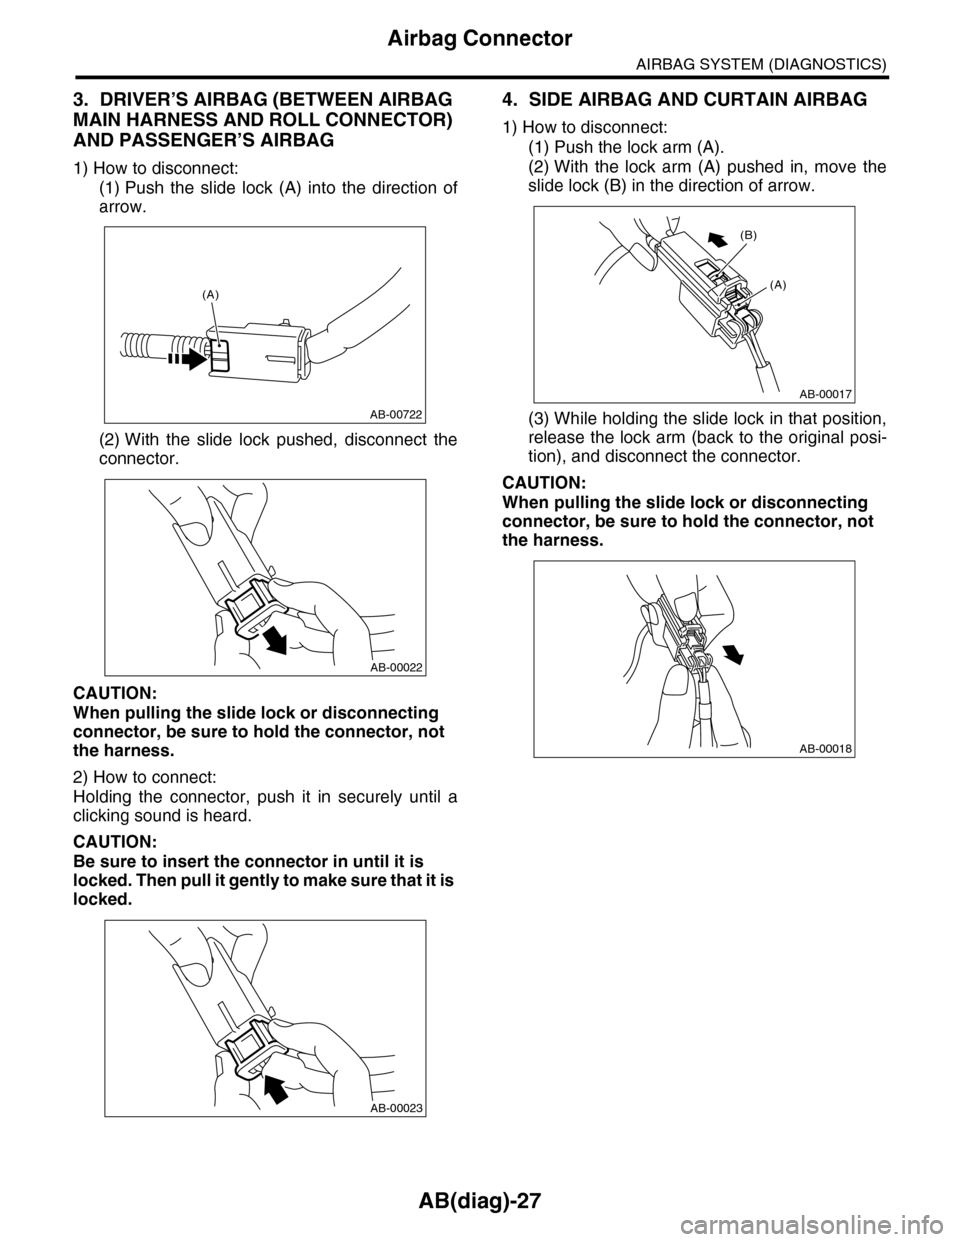 SUBARU TRIBECA 2009 1.G Service Workshop Manual AB(diag)-27
Airbag Connector
AIRBAG SYSTEM (DIAGNOSTICS)
3. DRIVER’S AIRBAG (BETWEEN AIRBAG 
MAIN HARNESS AND ROLL CONNECTOR) 
AND PASSENGER’S AIRBAG
1) How to disconnect:
(1) Push  the  slide  lo